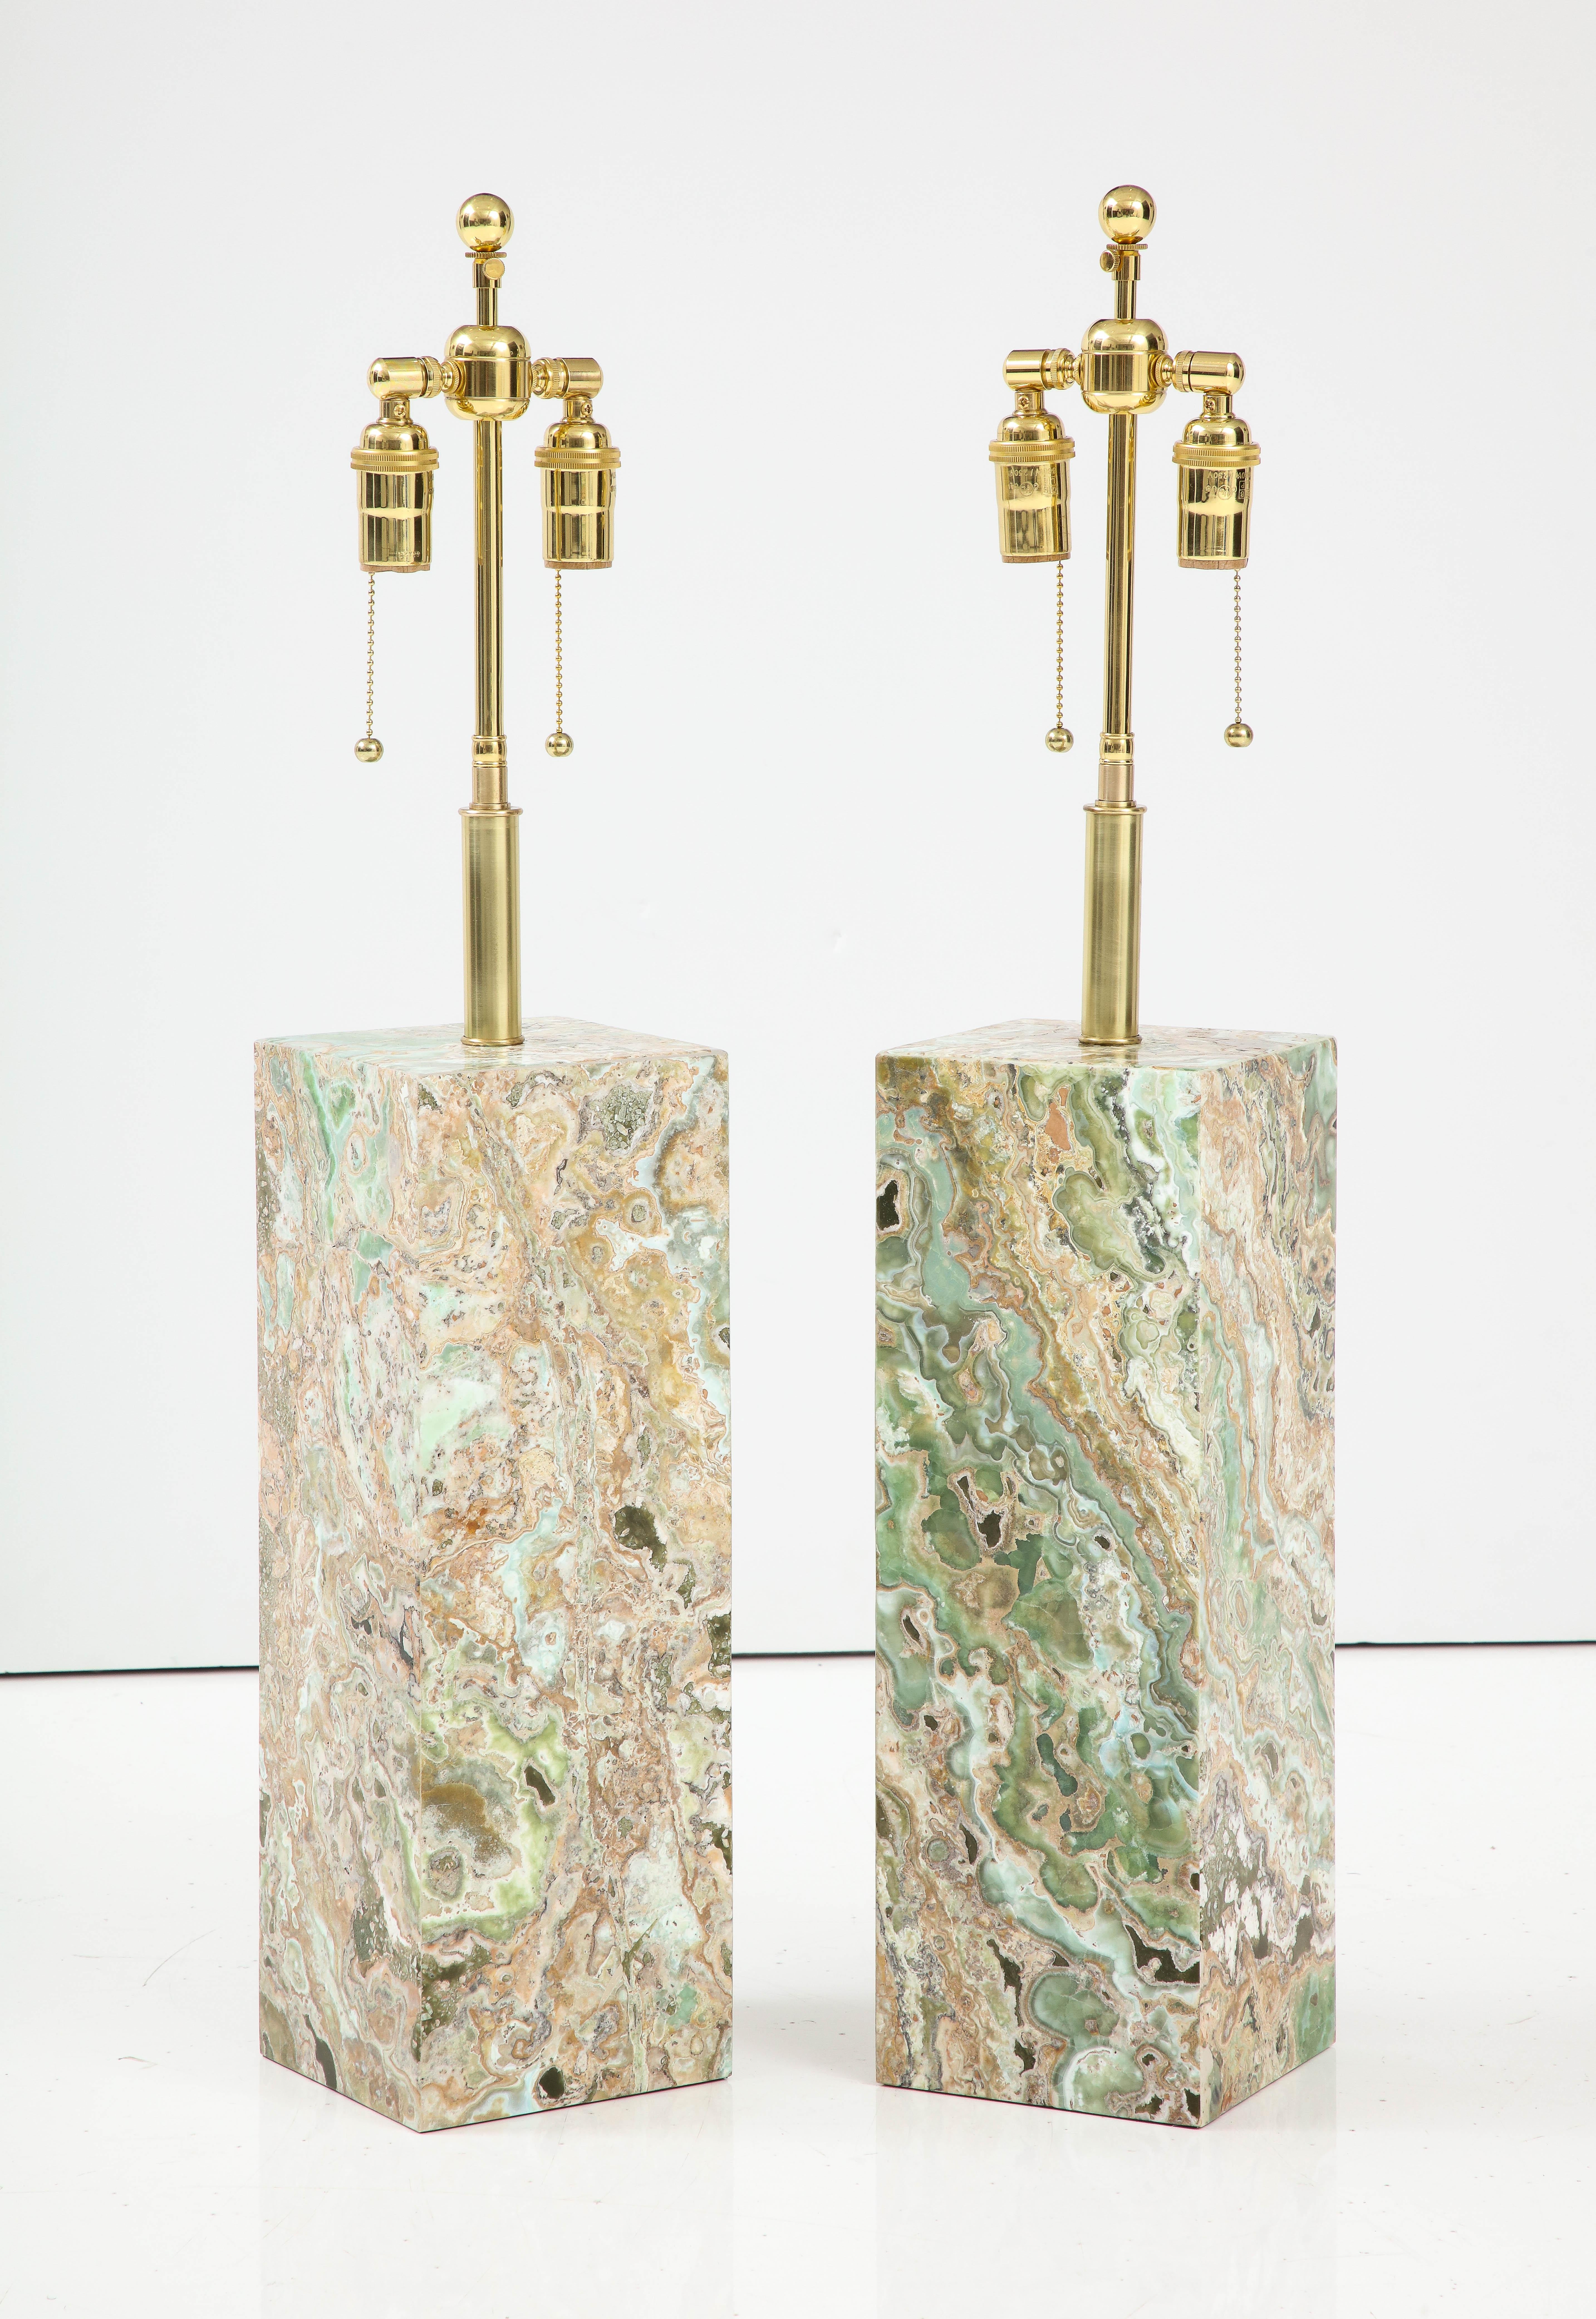 Spectacular pair of large Onyx table lamps.
This beautifully made pair of lamps have been Newly rewired with adjustable polished brass double clusters and silk rayon cords that take standard size light bulbs.
The height to the top of the Onyx is 18